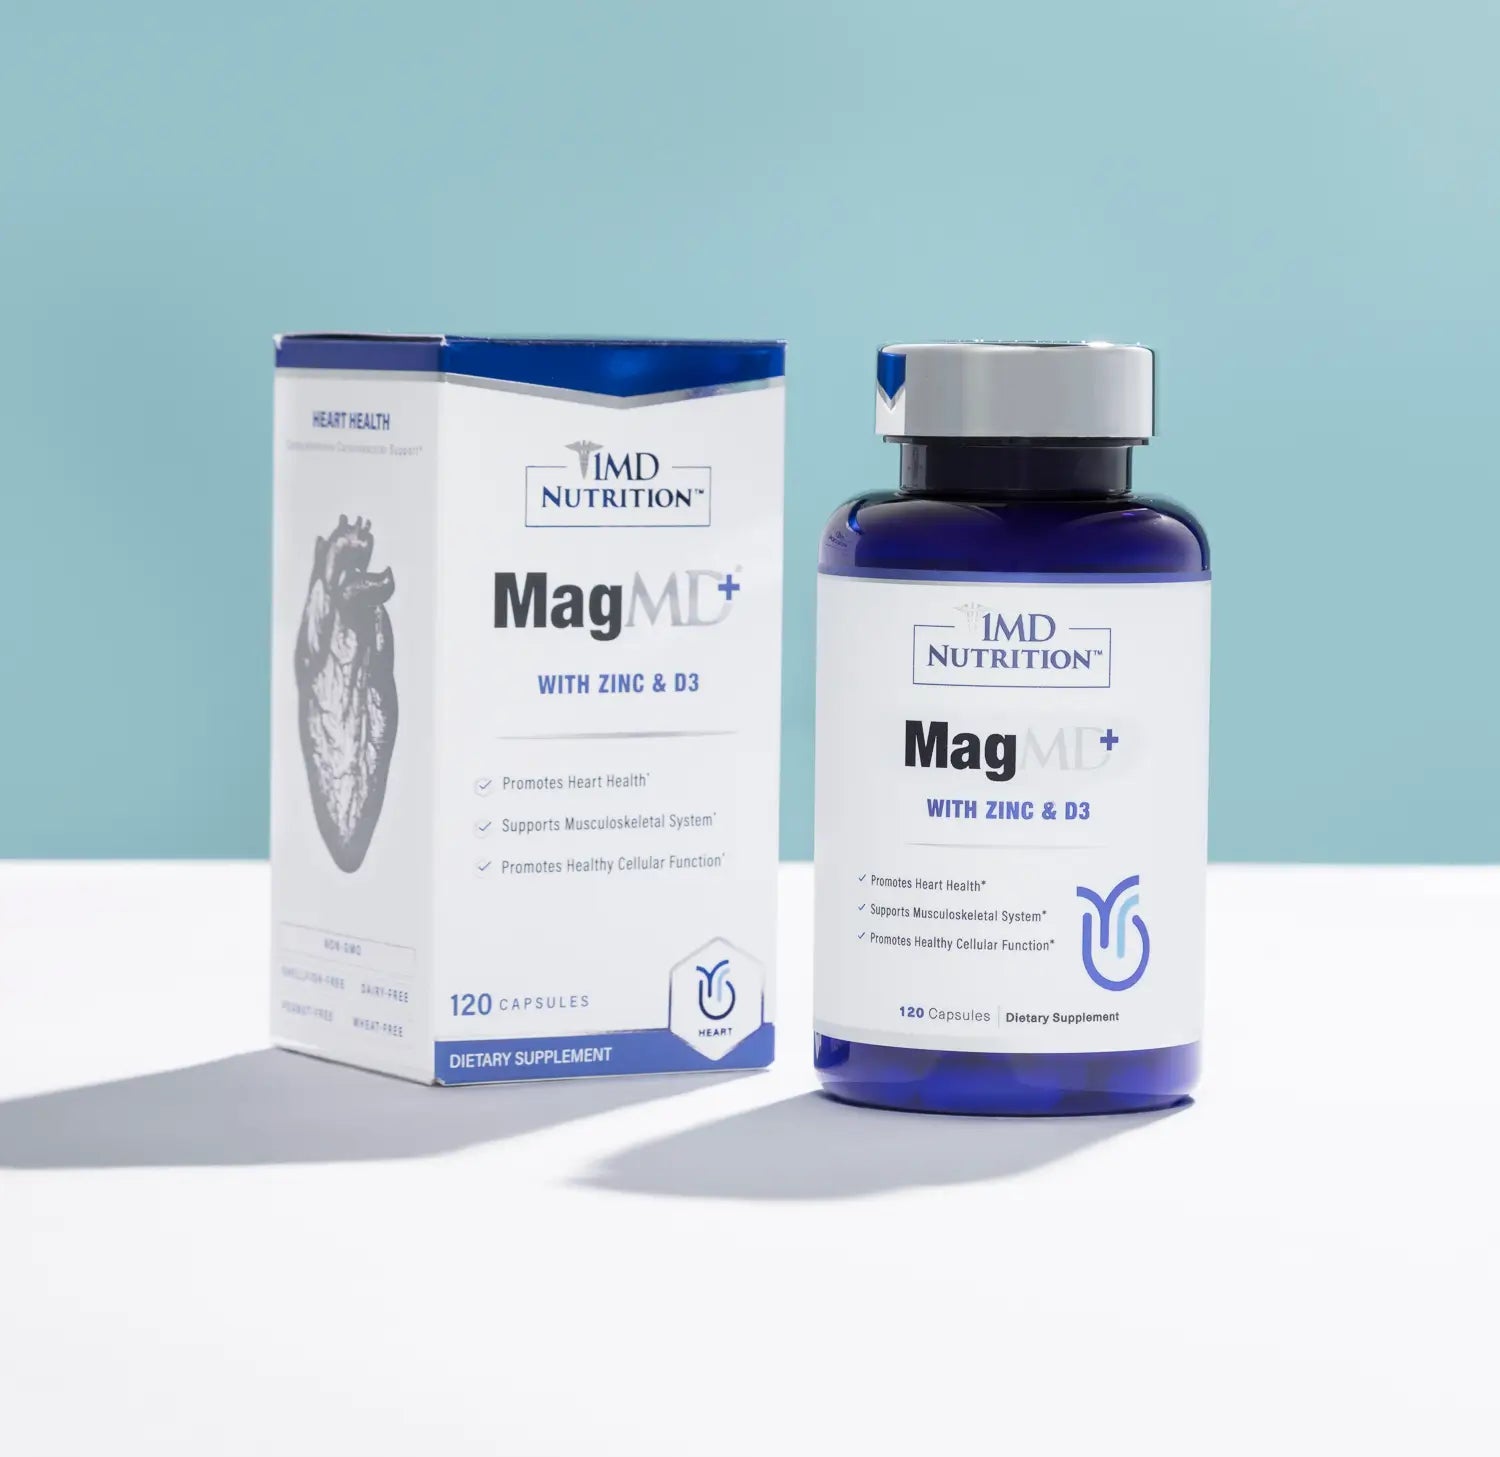 1MD Nutrition MagMD Plus box and bottle 